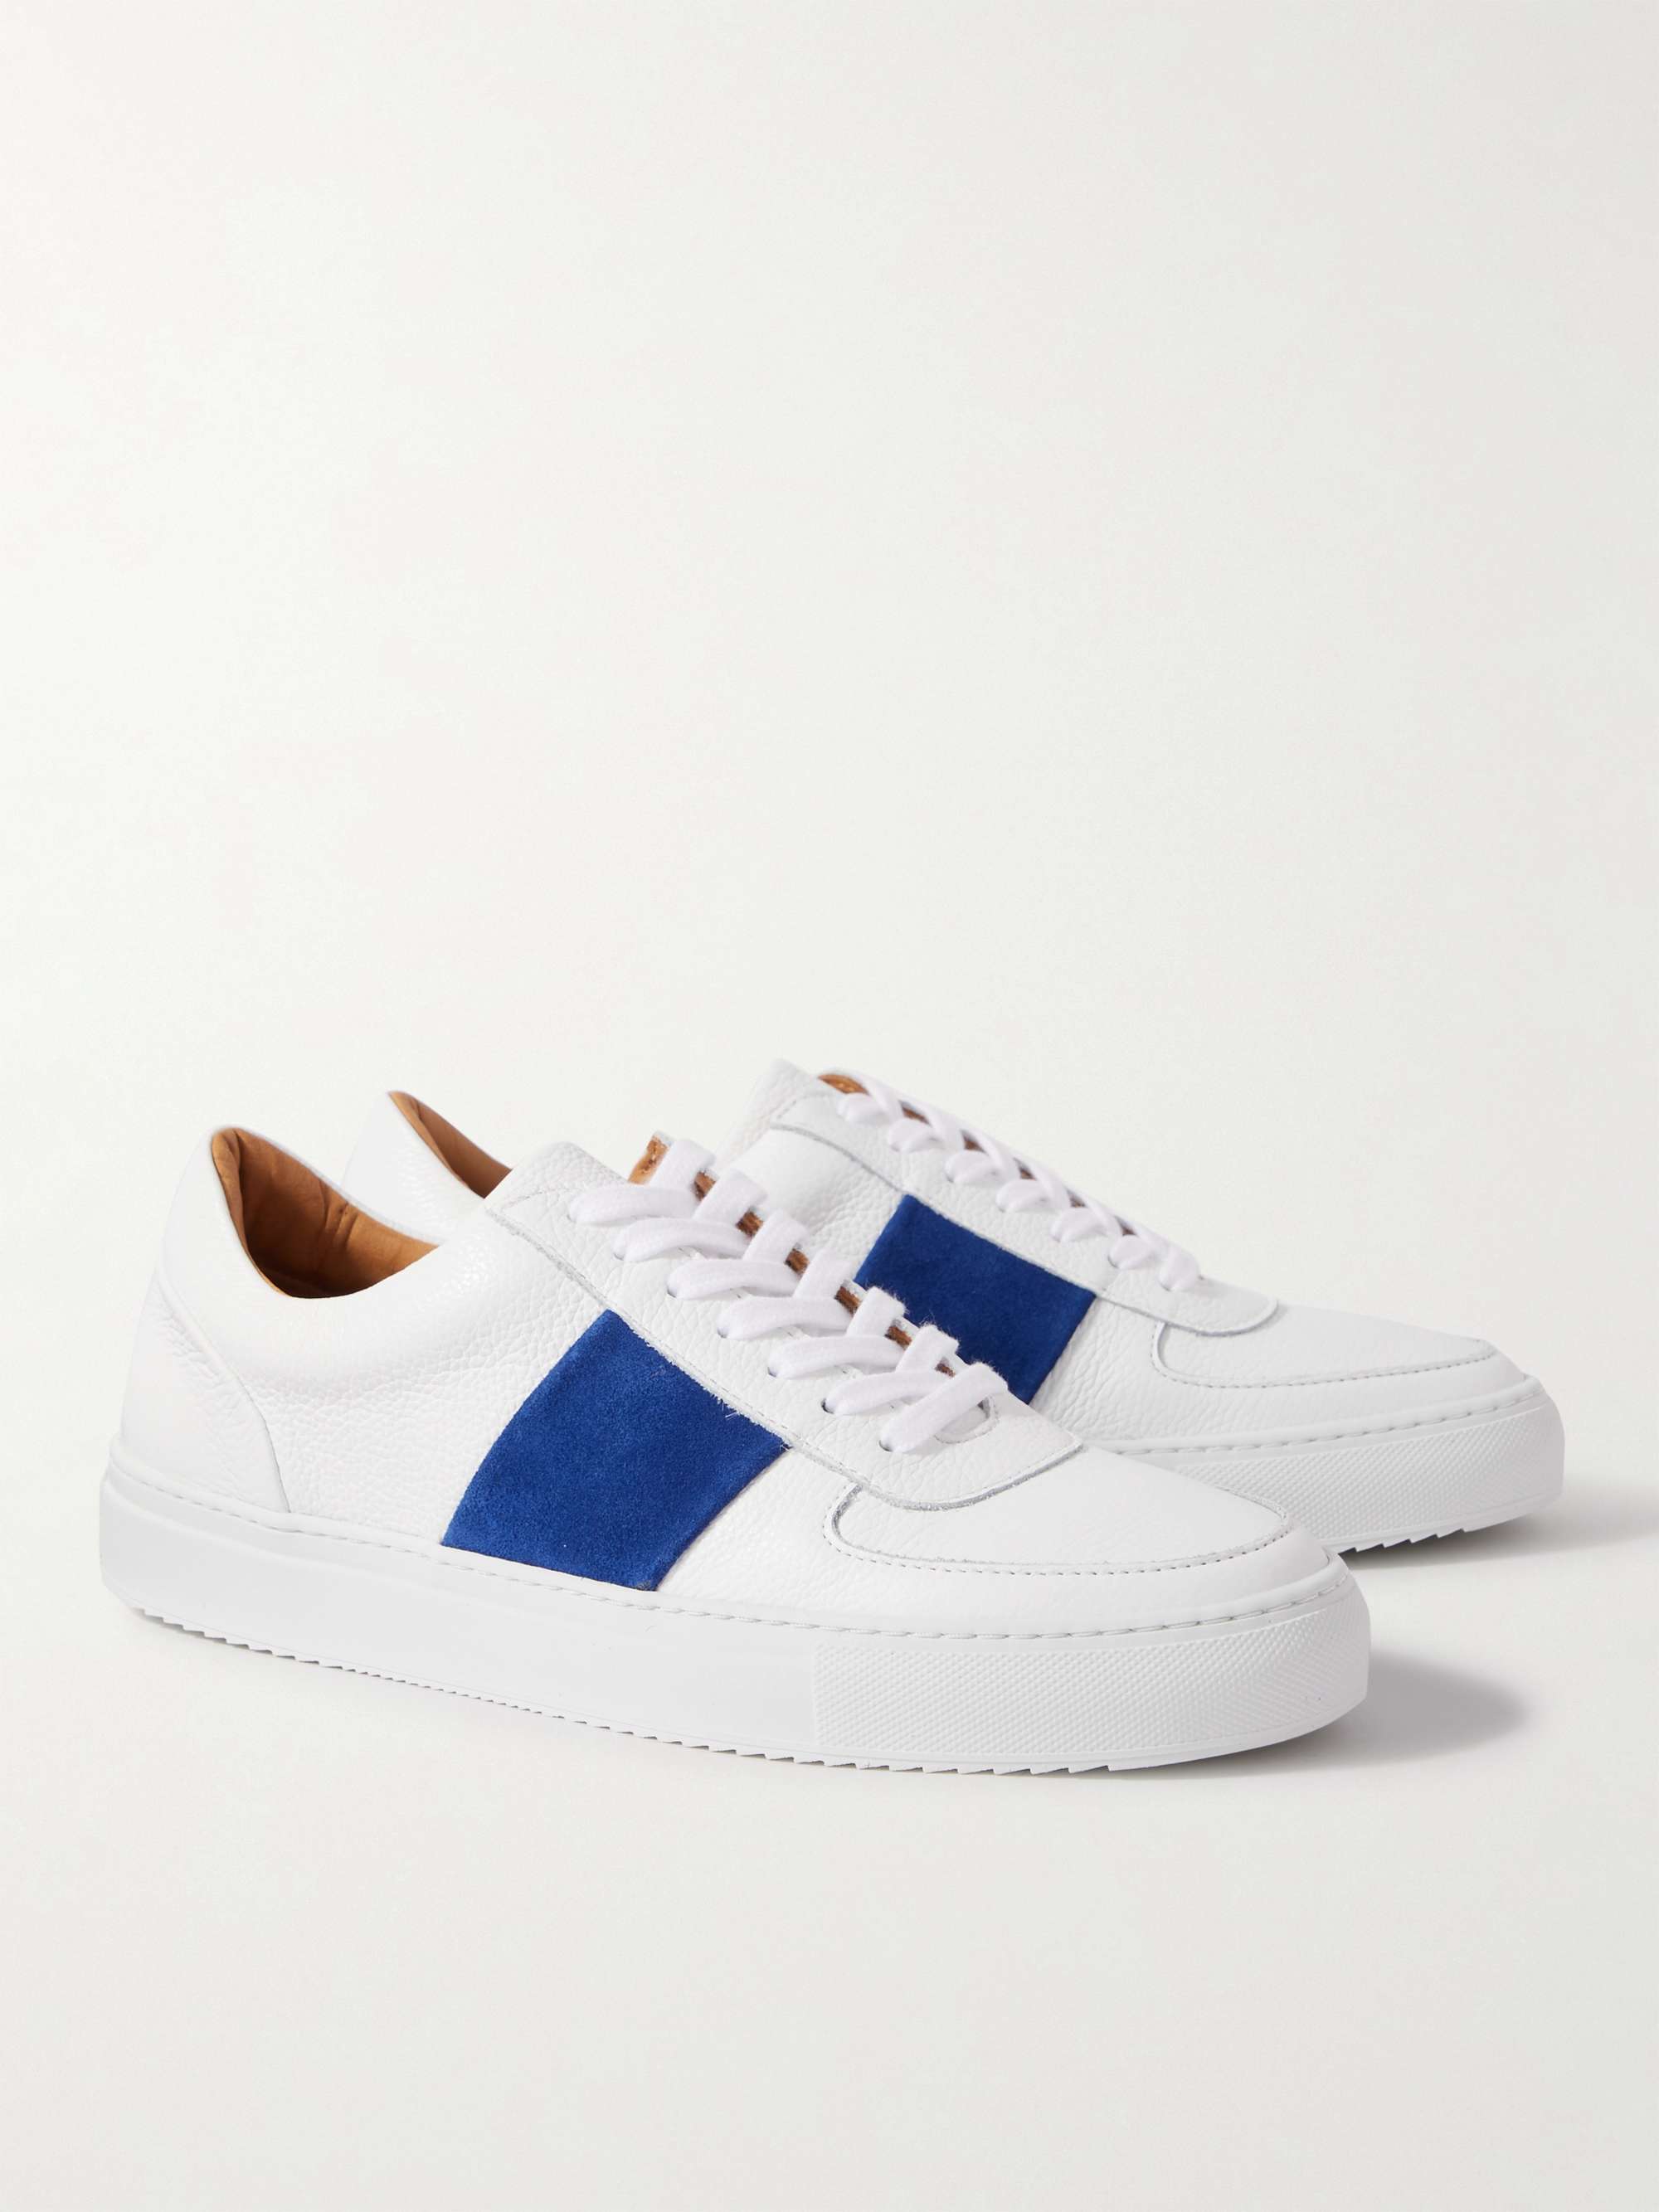 MR P. Larry Pebble-Grain Leather and Suede Sneakers | MR PORTER